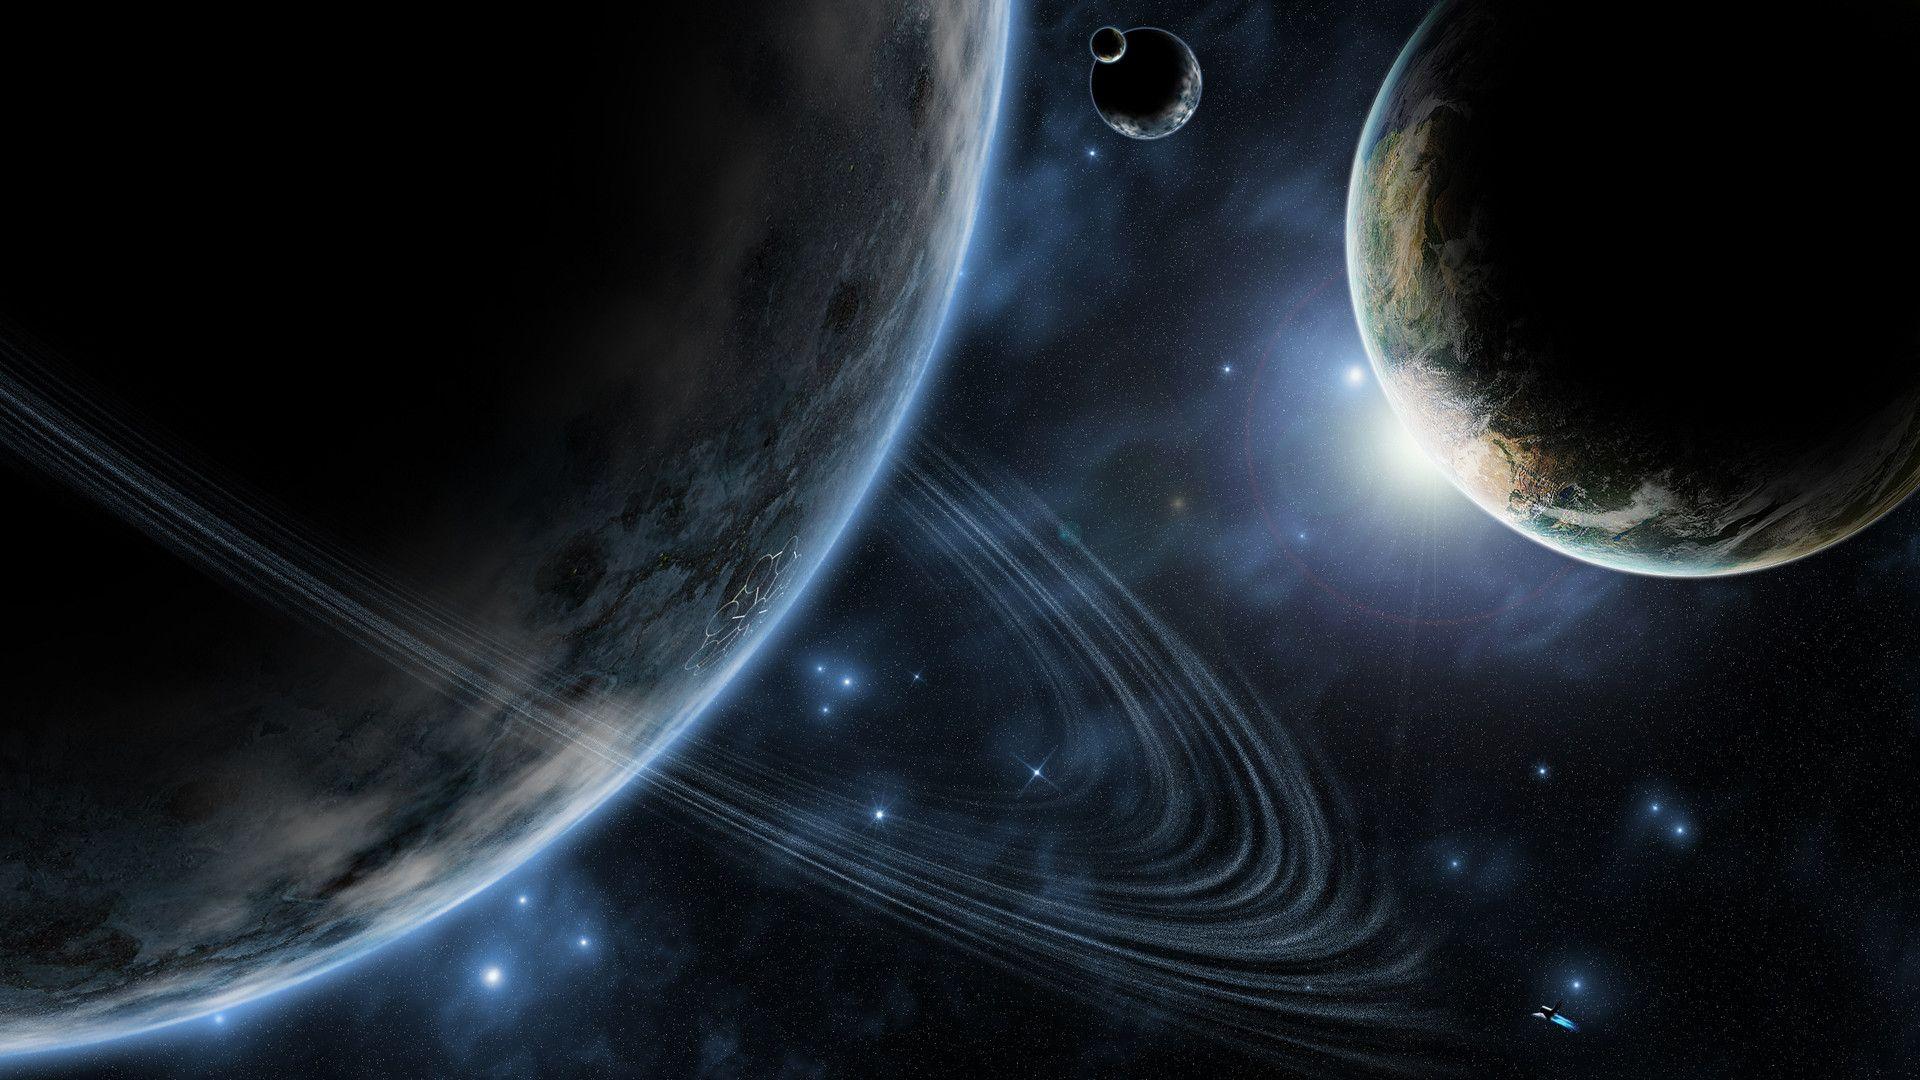 Space Wallpaper 1920×1080 Top Space Image For Desktop Background